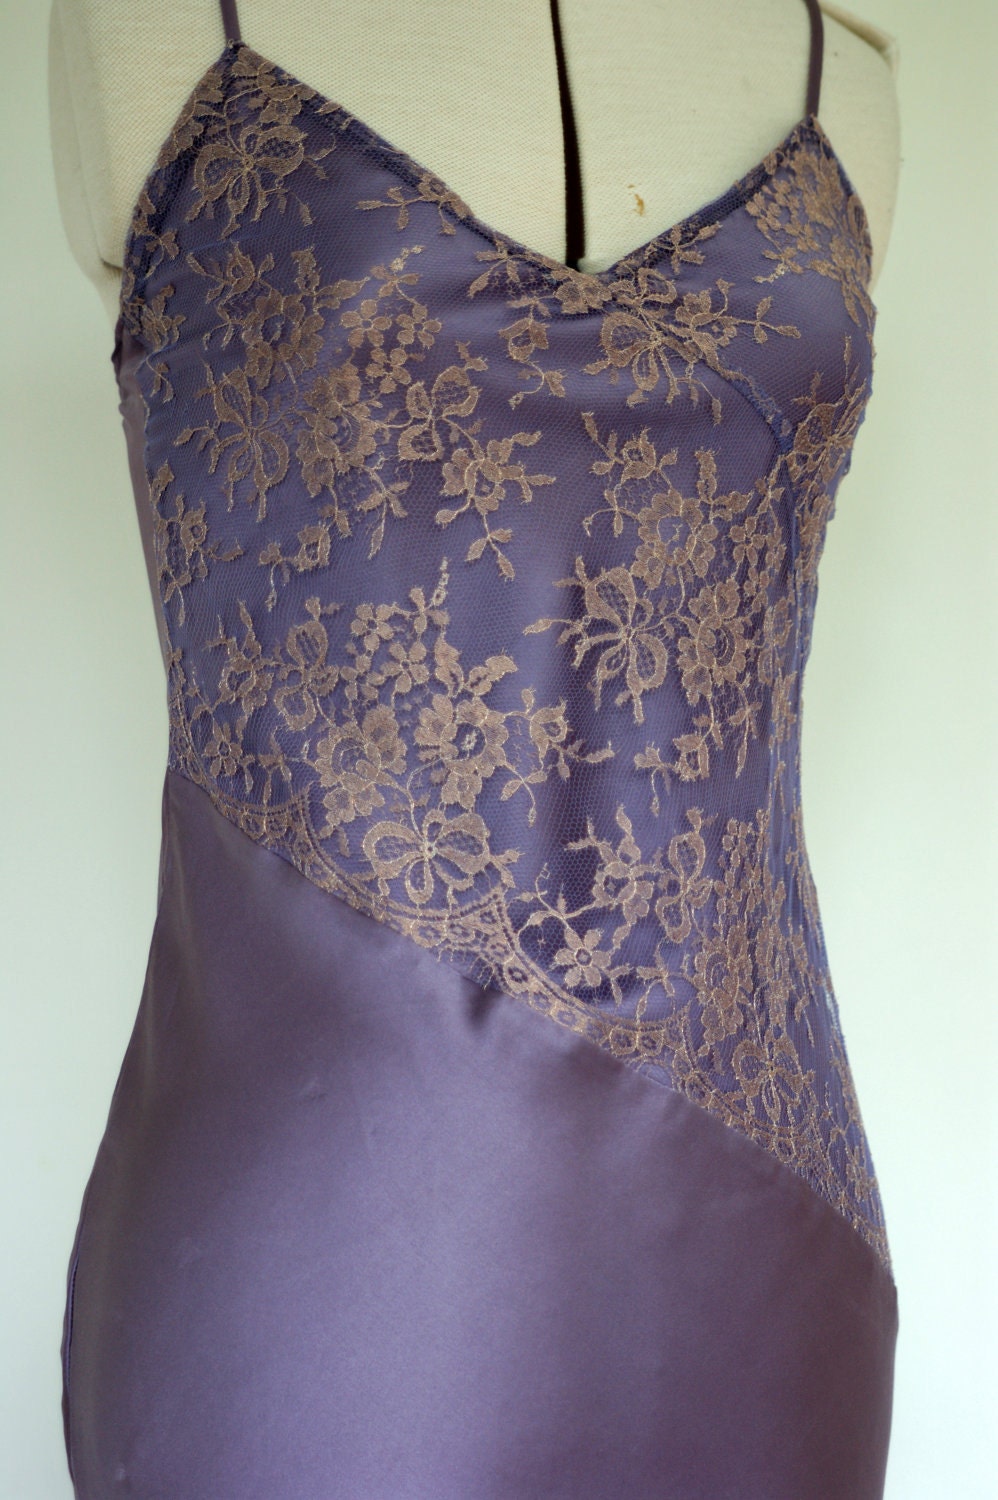 Silk satin dress with metallic lace panels by RiasanBoutique